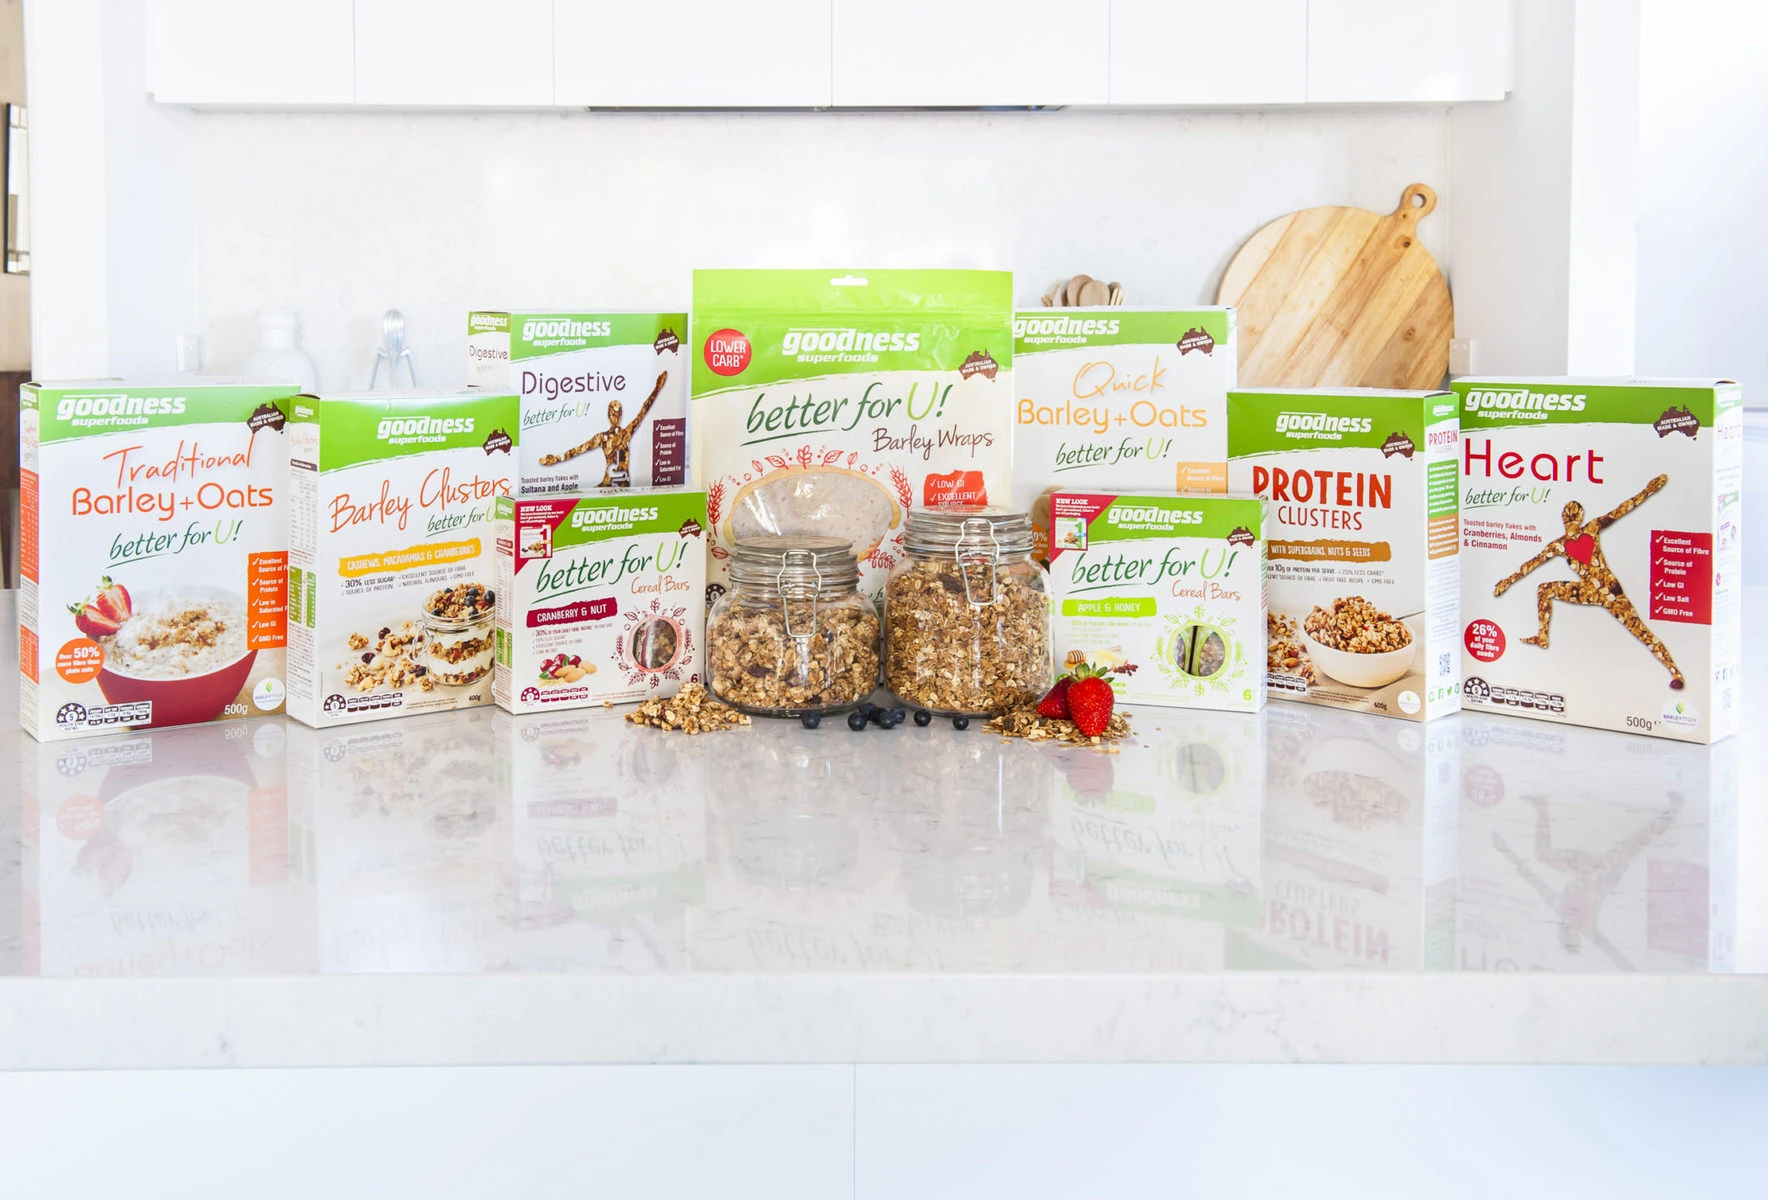 A variety of healthy wholegrain products containing barley.